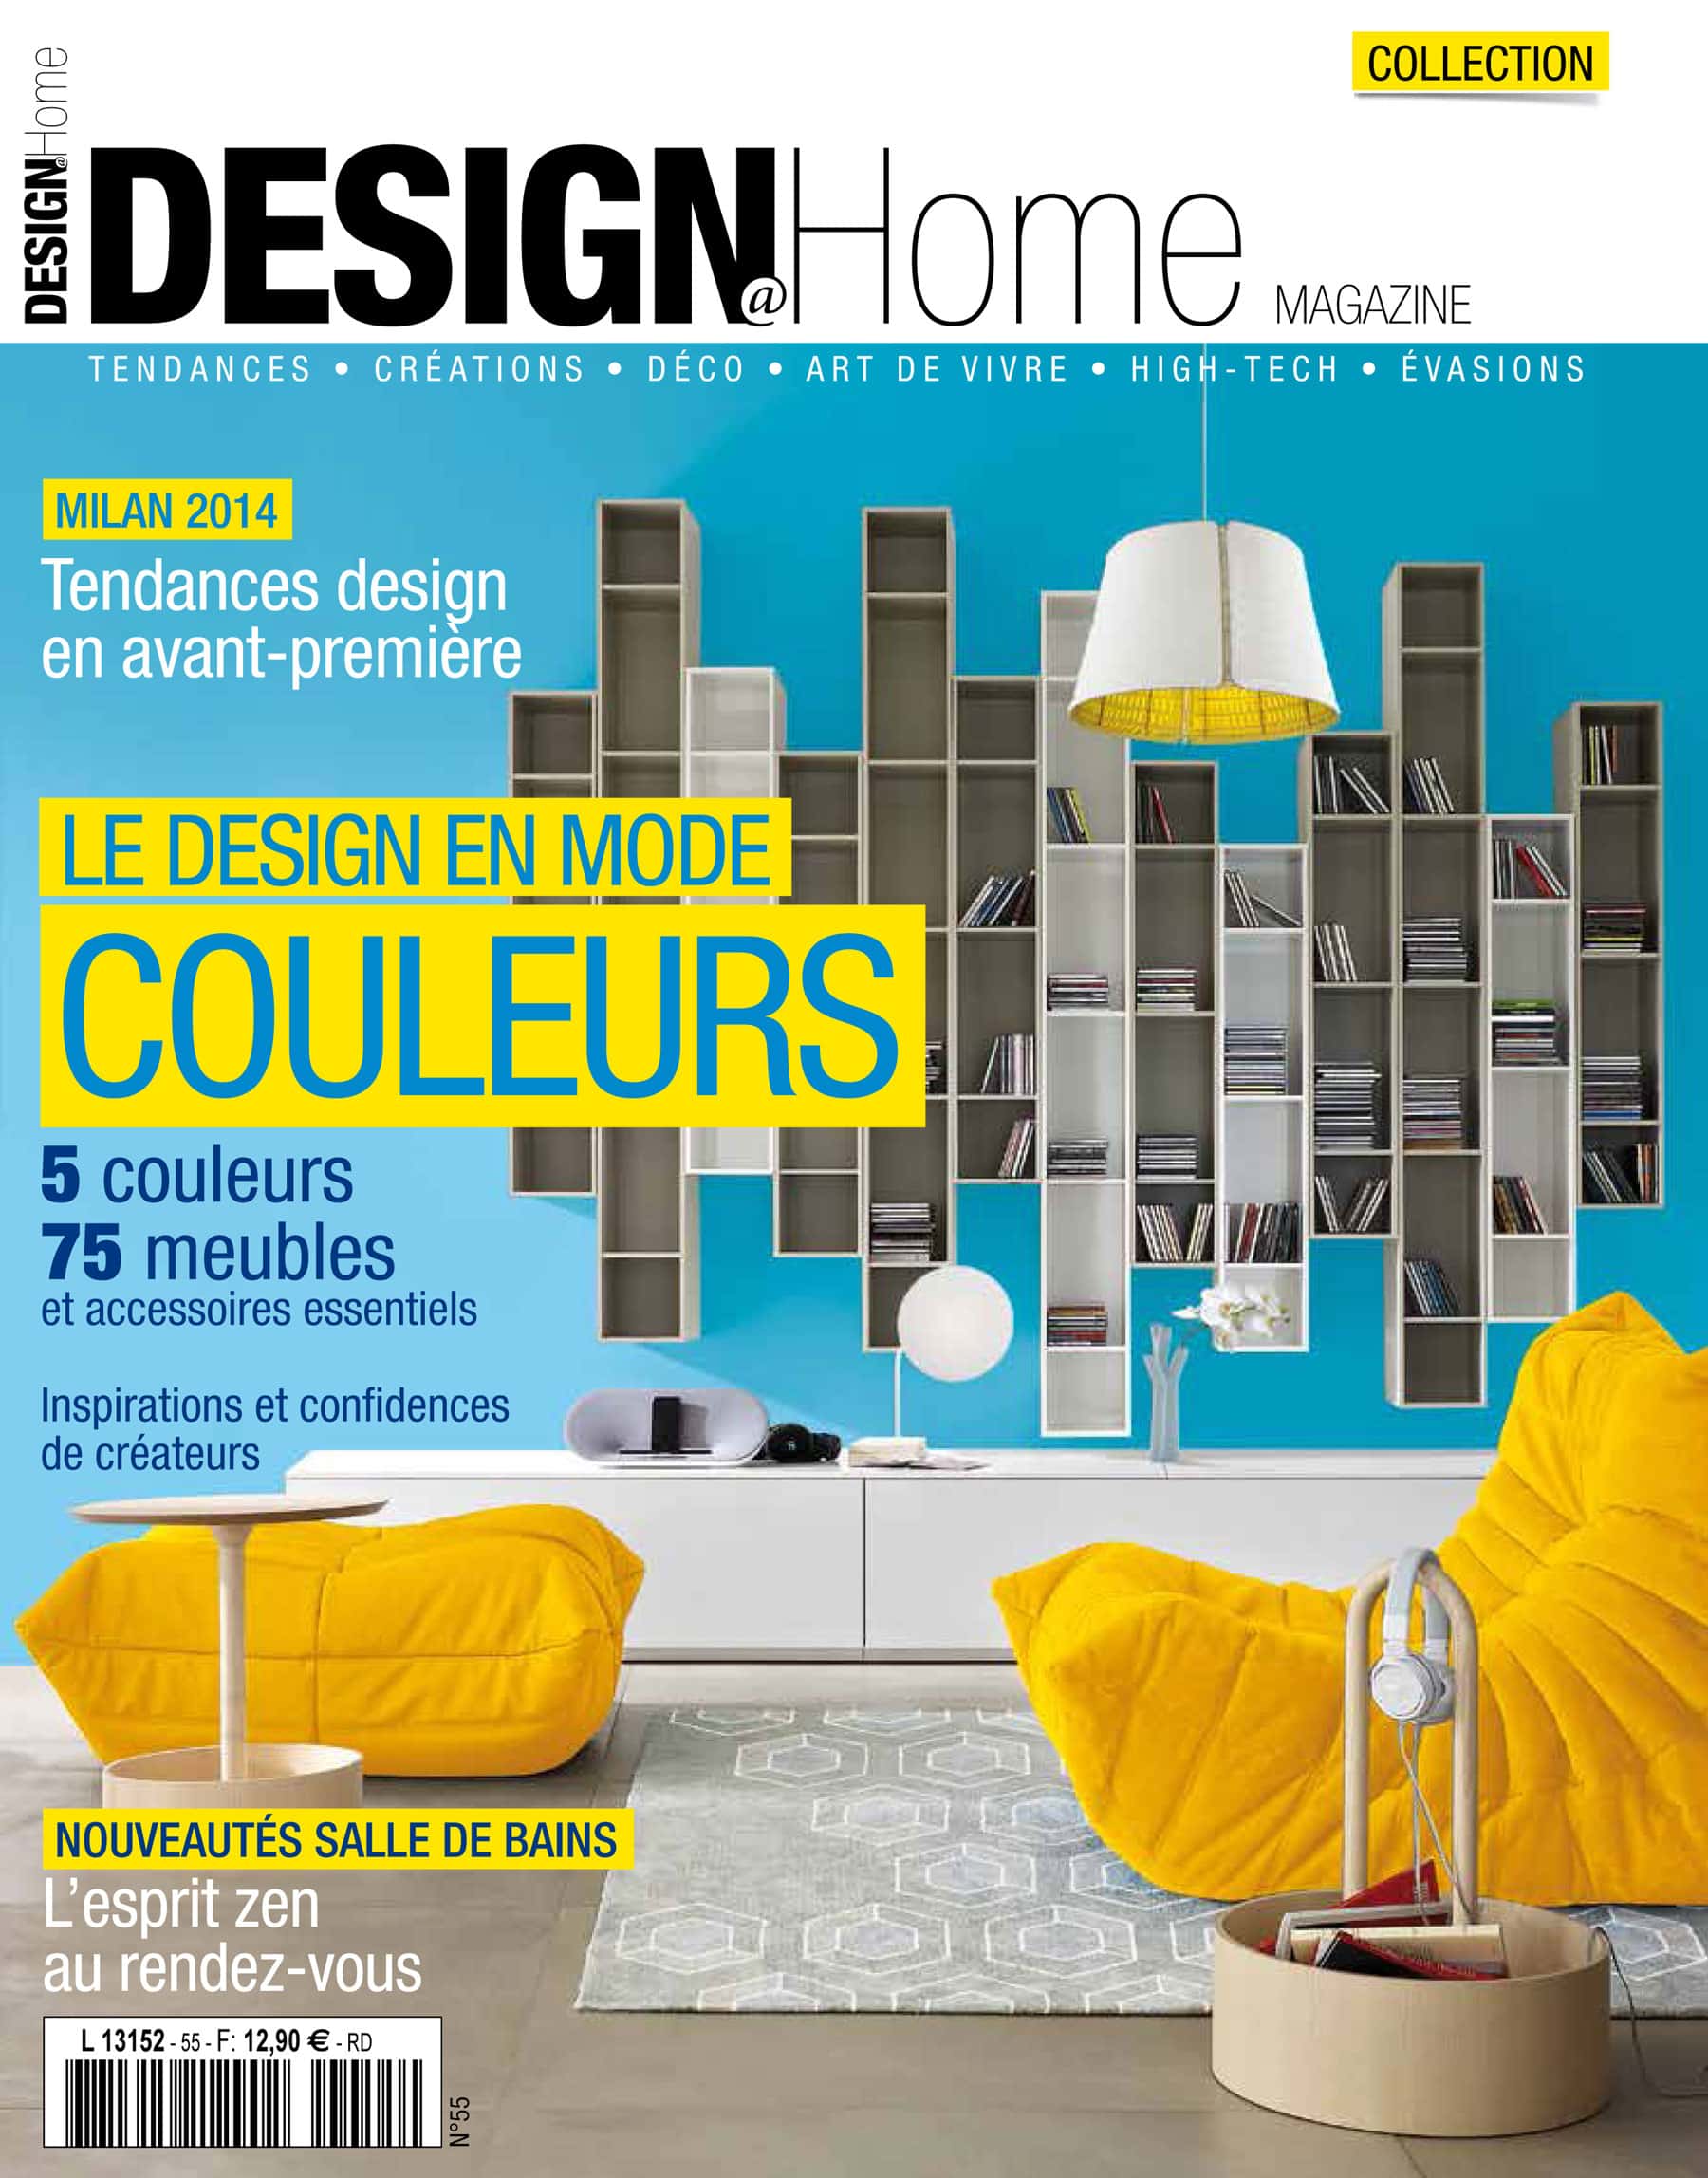 exterrieurs-design-magazine-france-and-design-at-home-magazine-france-feature-the-running-wall-residence-4